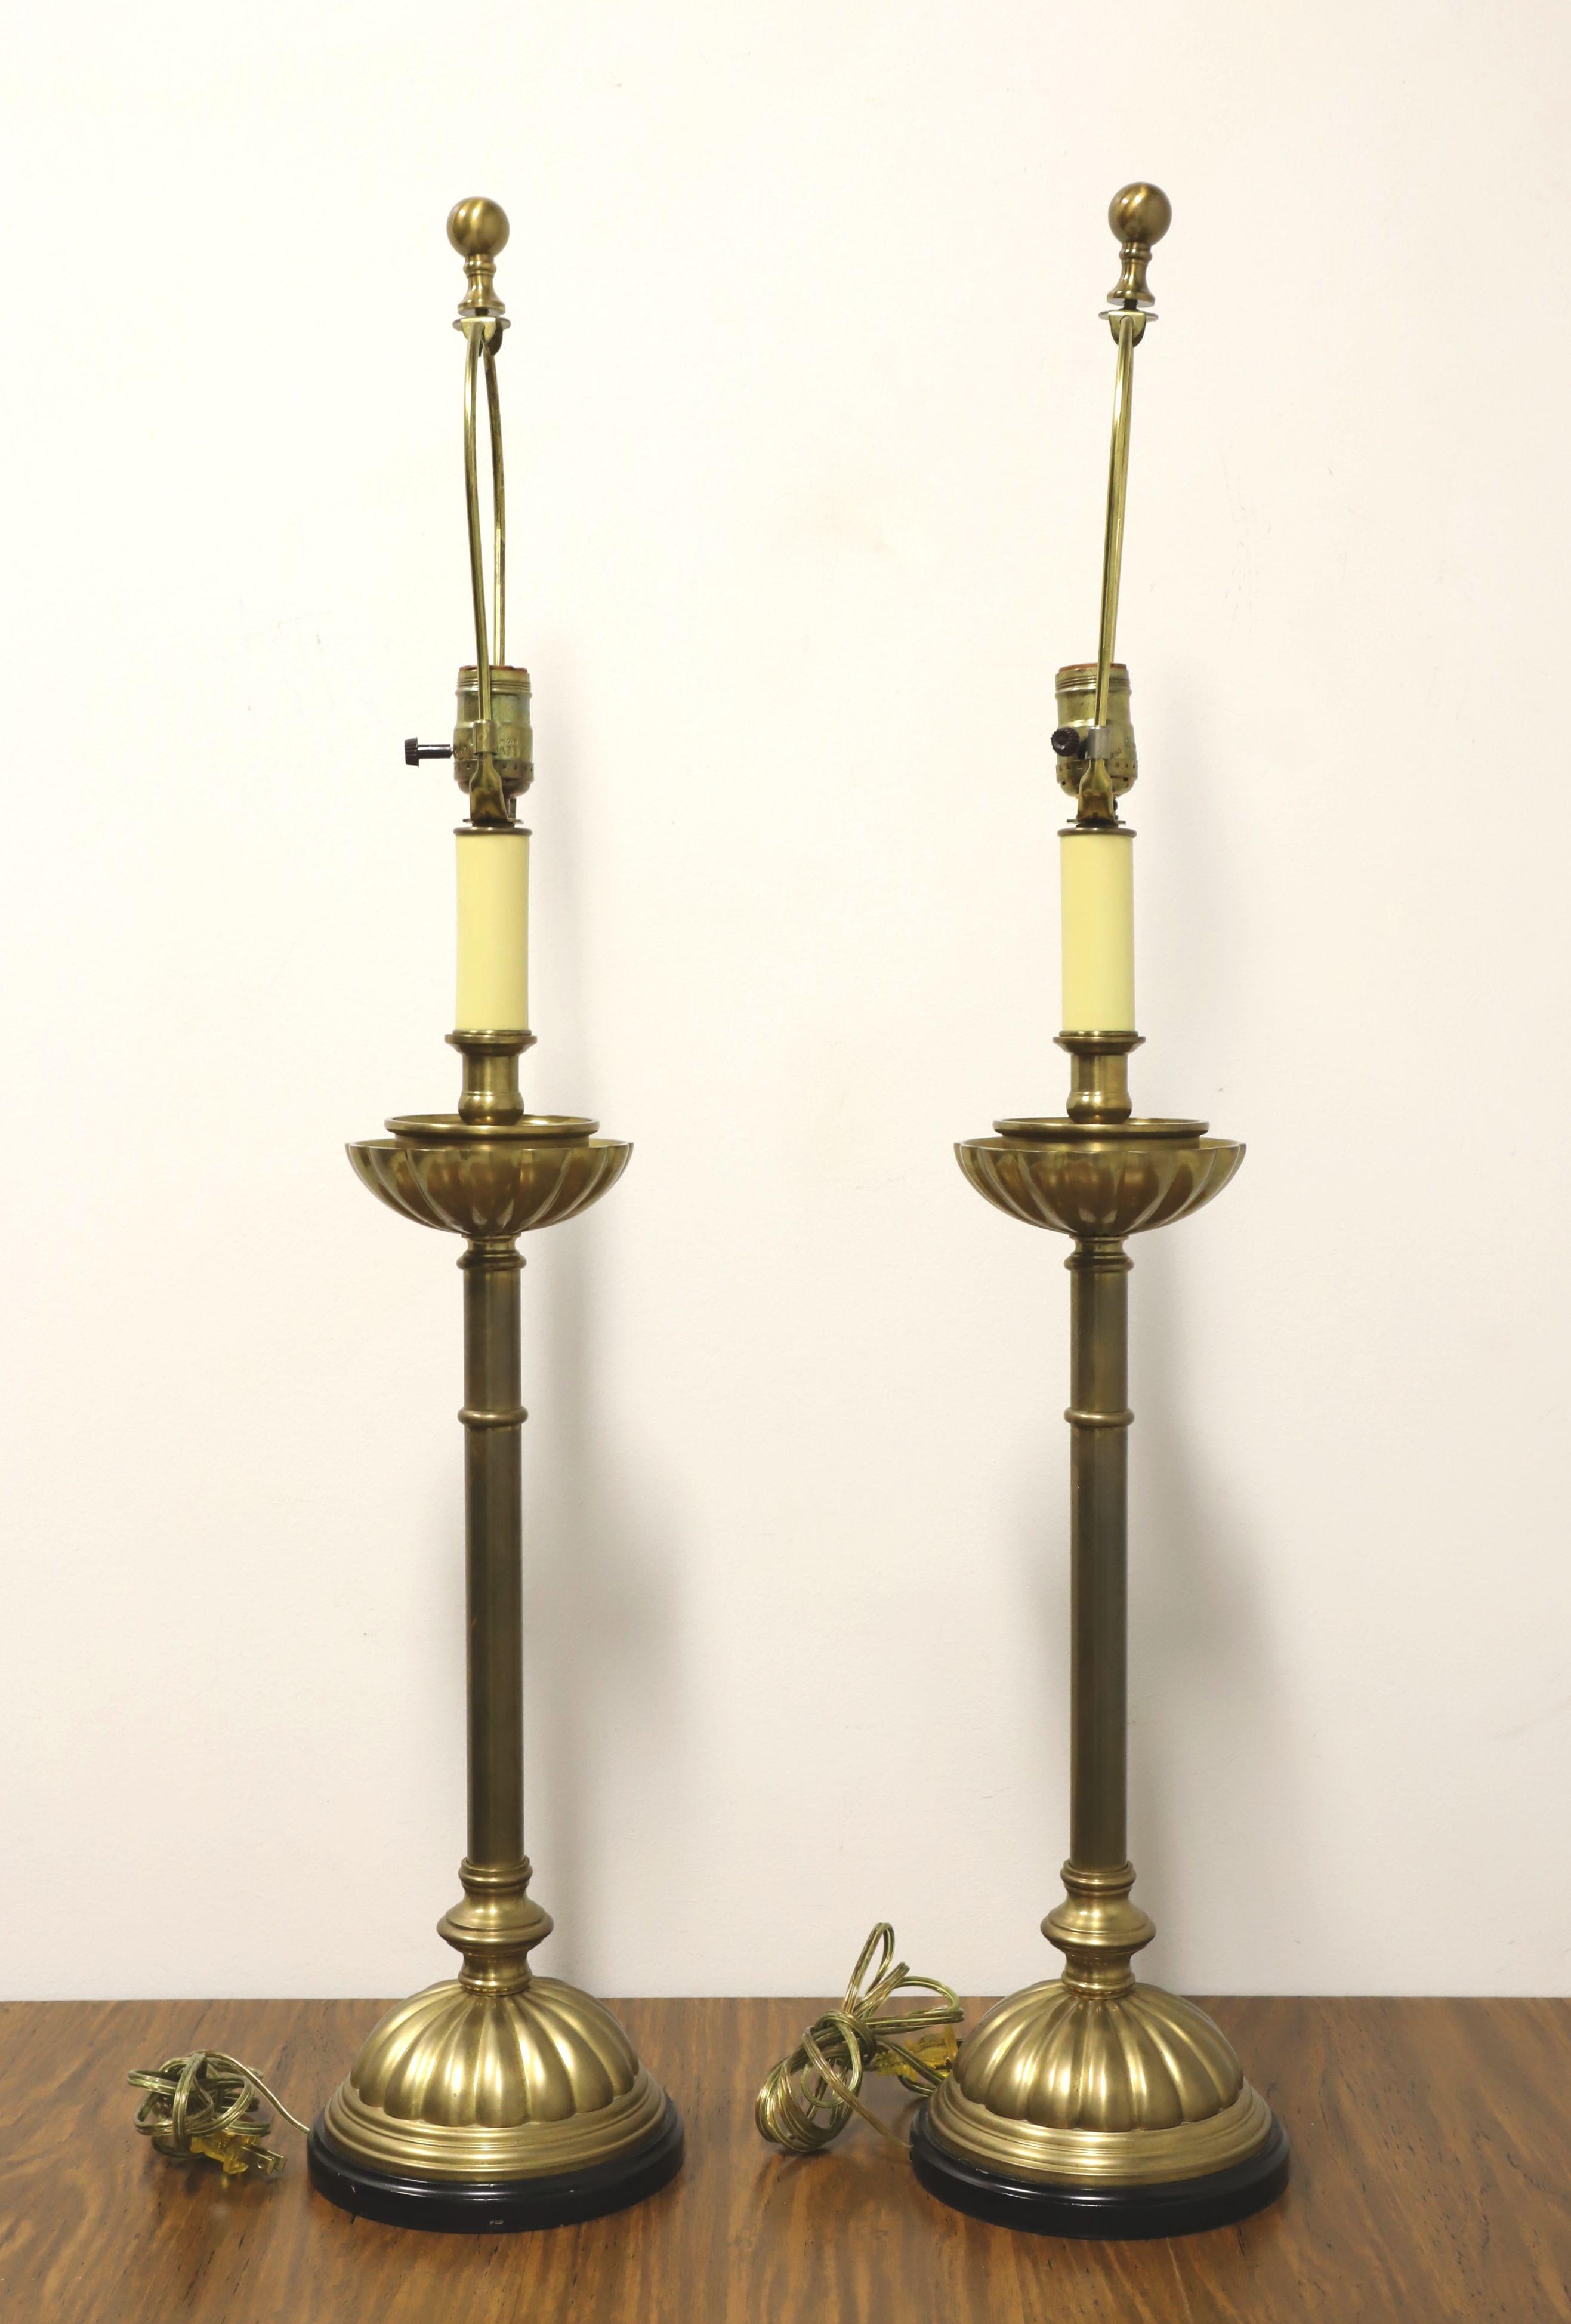 A pair of Traditional style candlestick table lamps, unbranded. Made of solid brass with a candlestick shape, a fluted upper tray at the base of the candle portion, white plastic supporting bulb socket to give an appearance of a candle, and a round